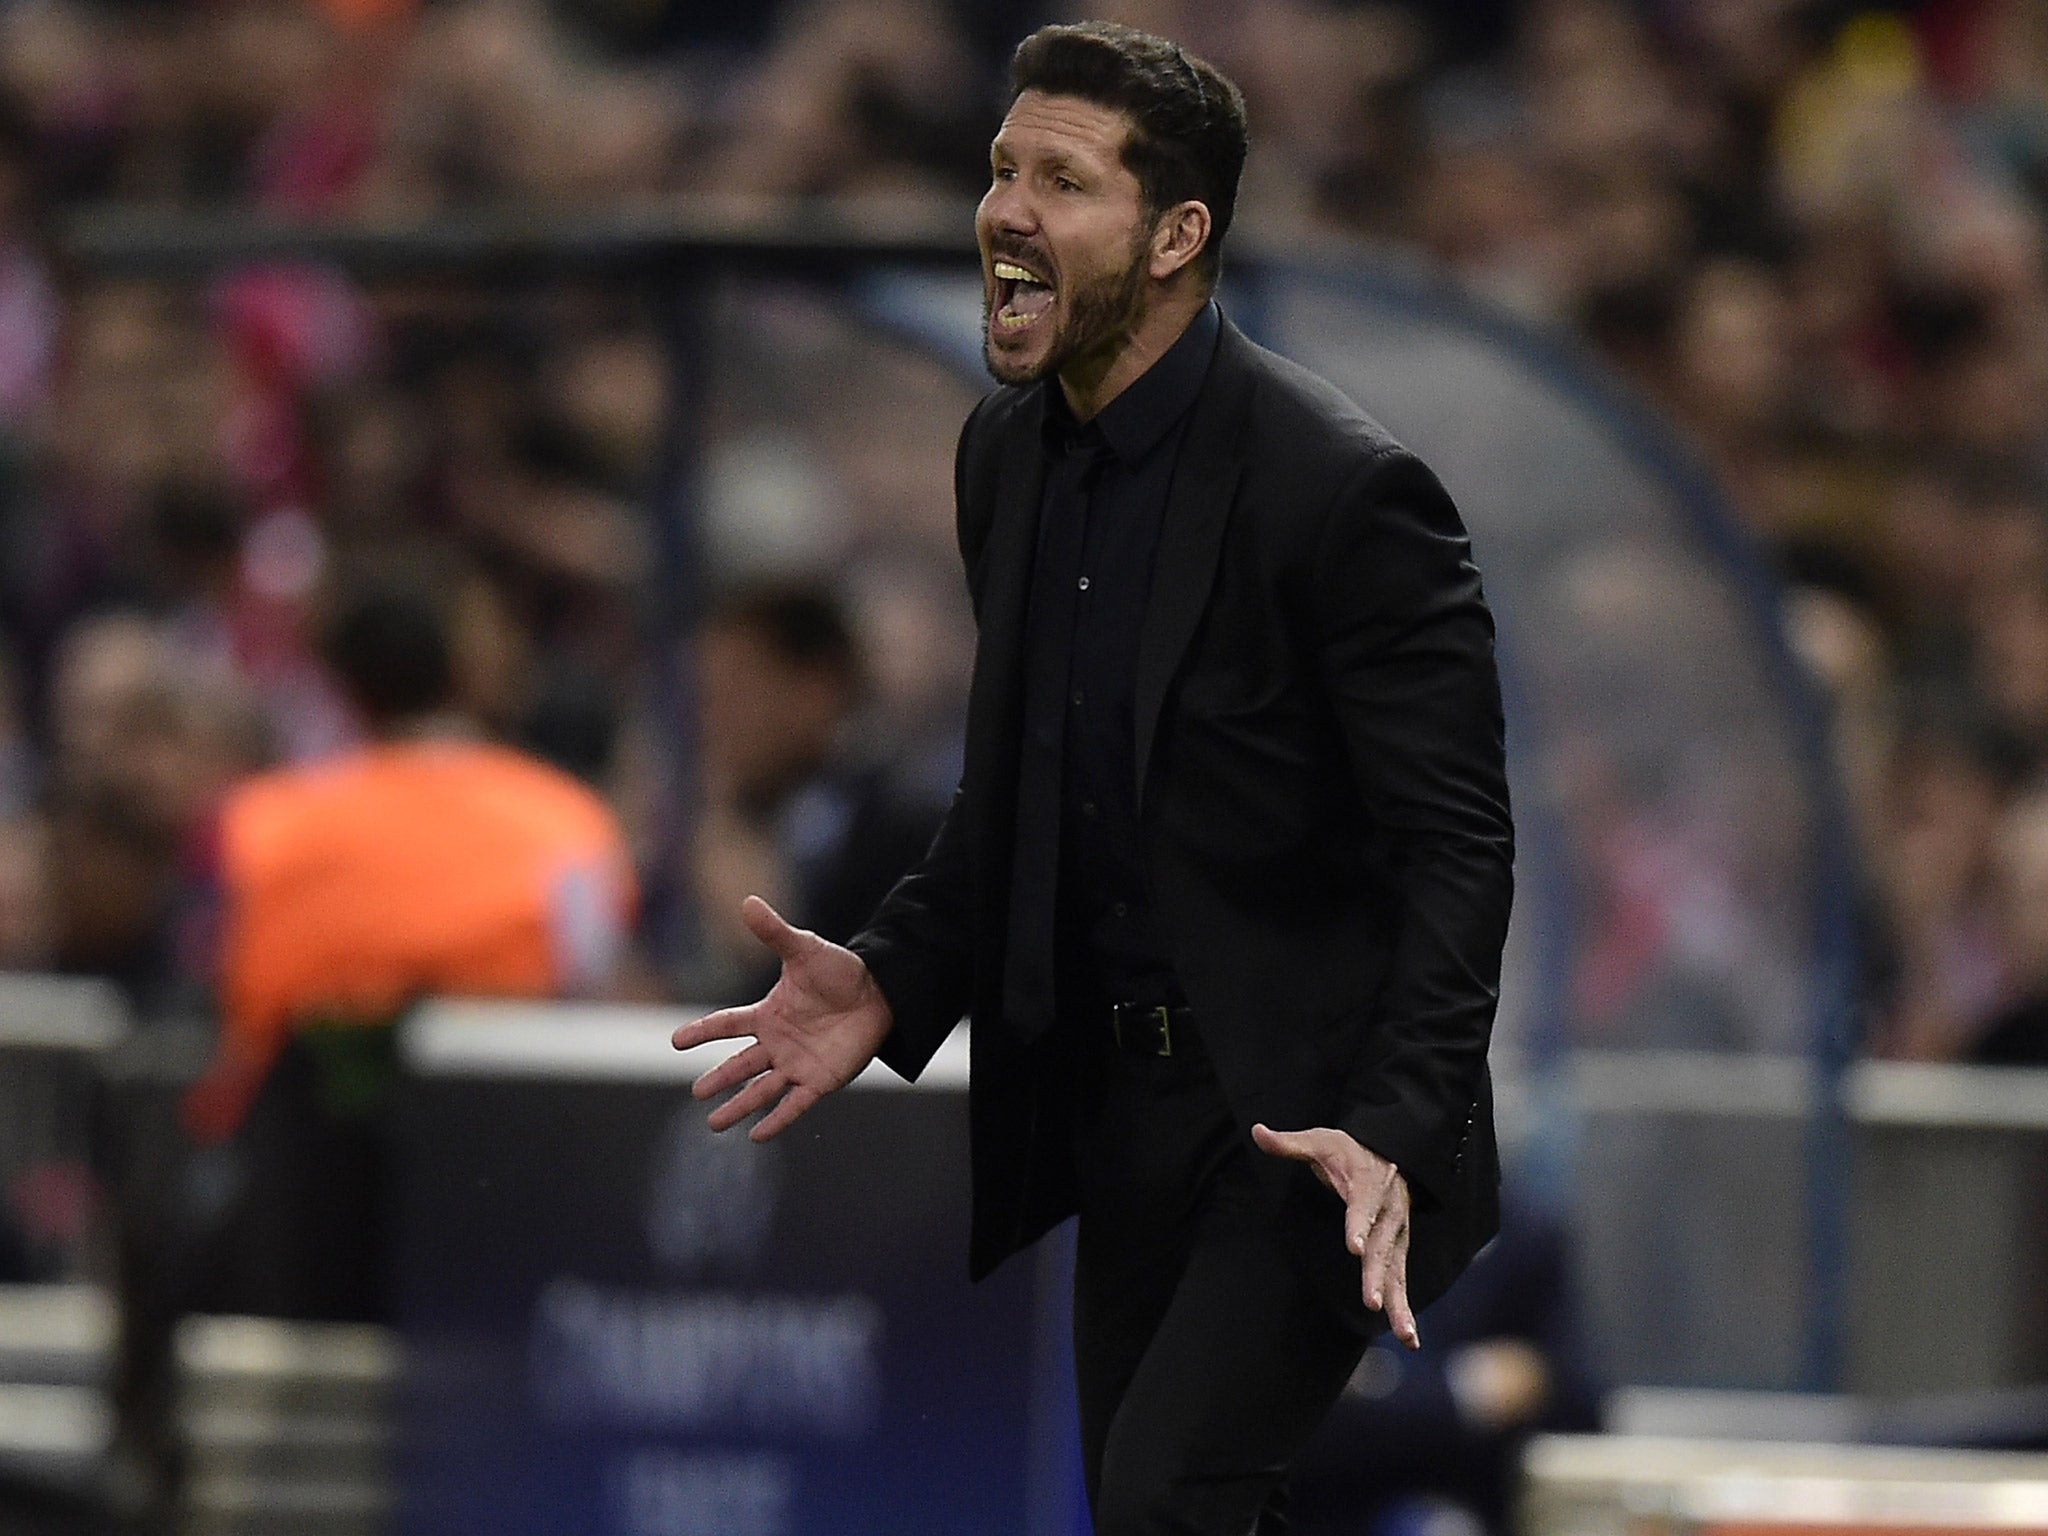 Diego Simeone: ‘I do not know which hurts more, this final or the last one’